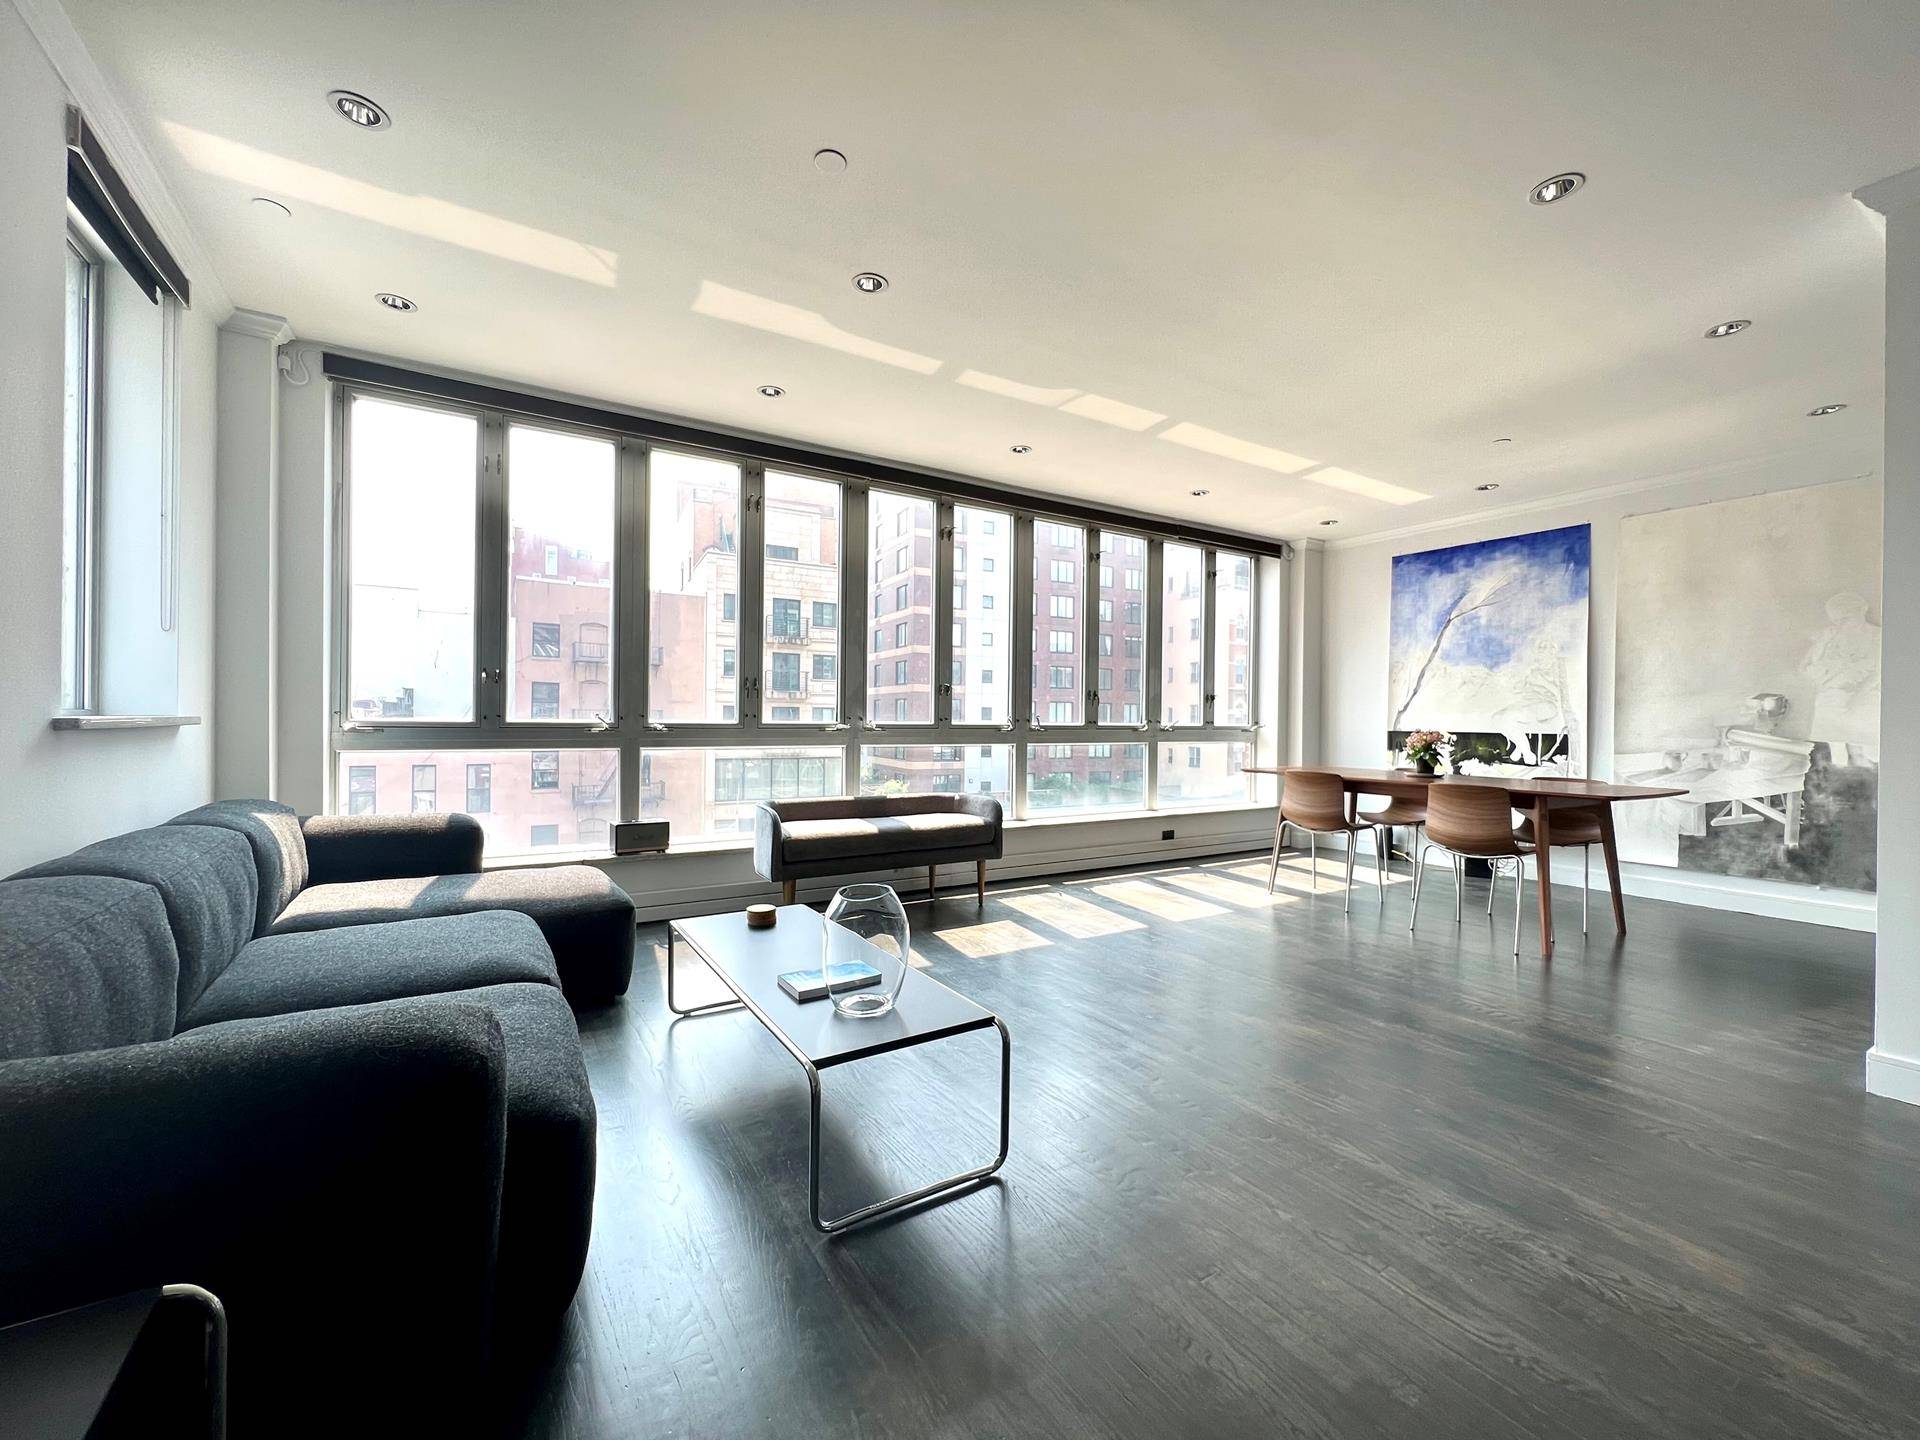 This is a Fully FURNISHED only, High end, 2 bedrooms 2 bathrooms loft apartment5 month terms minimumElevator opens in this full floor loft, extremely well furnished with custom furniture and ...